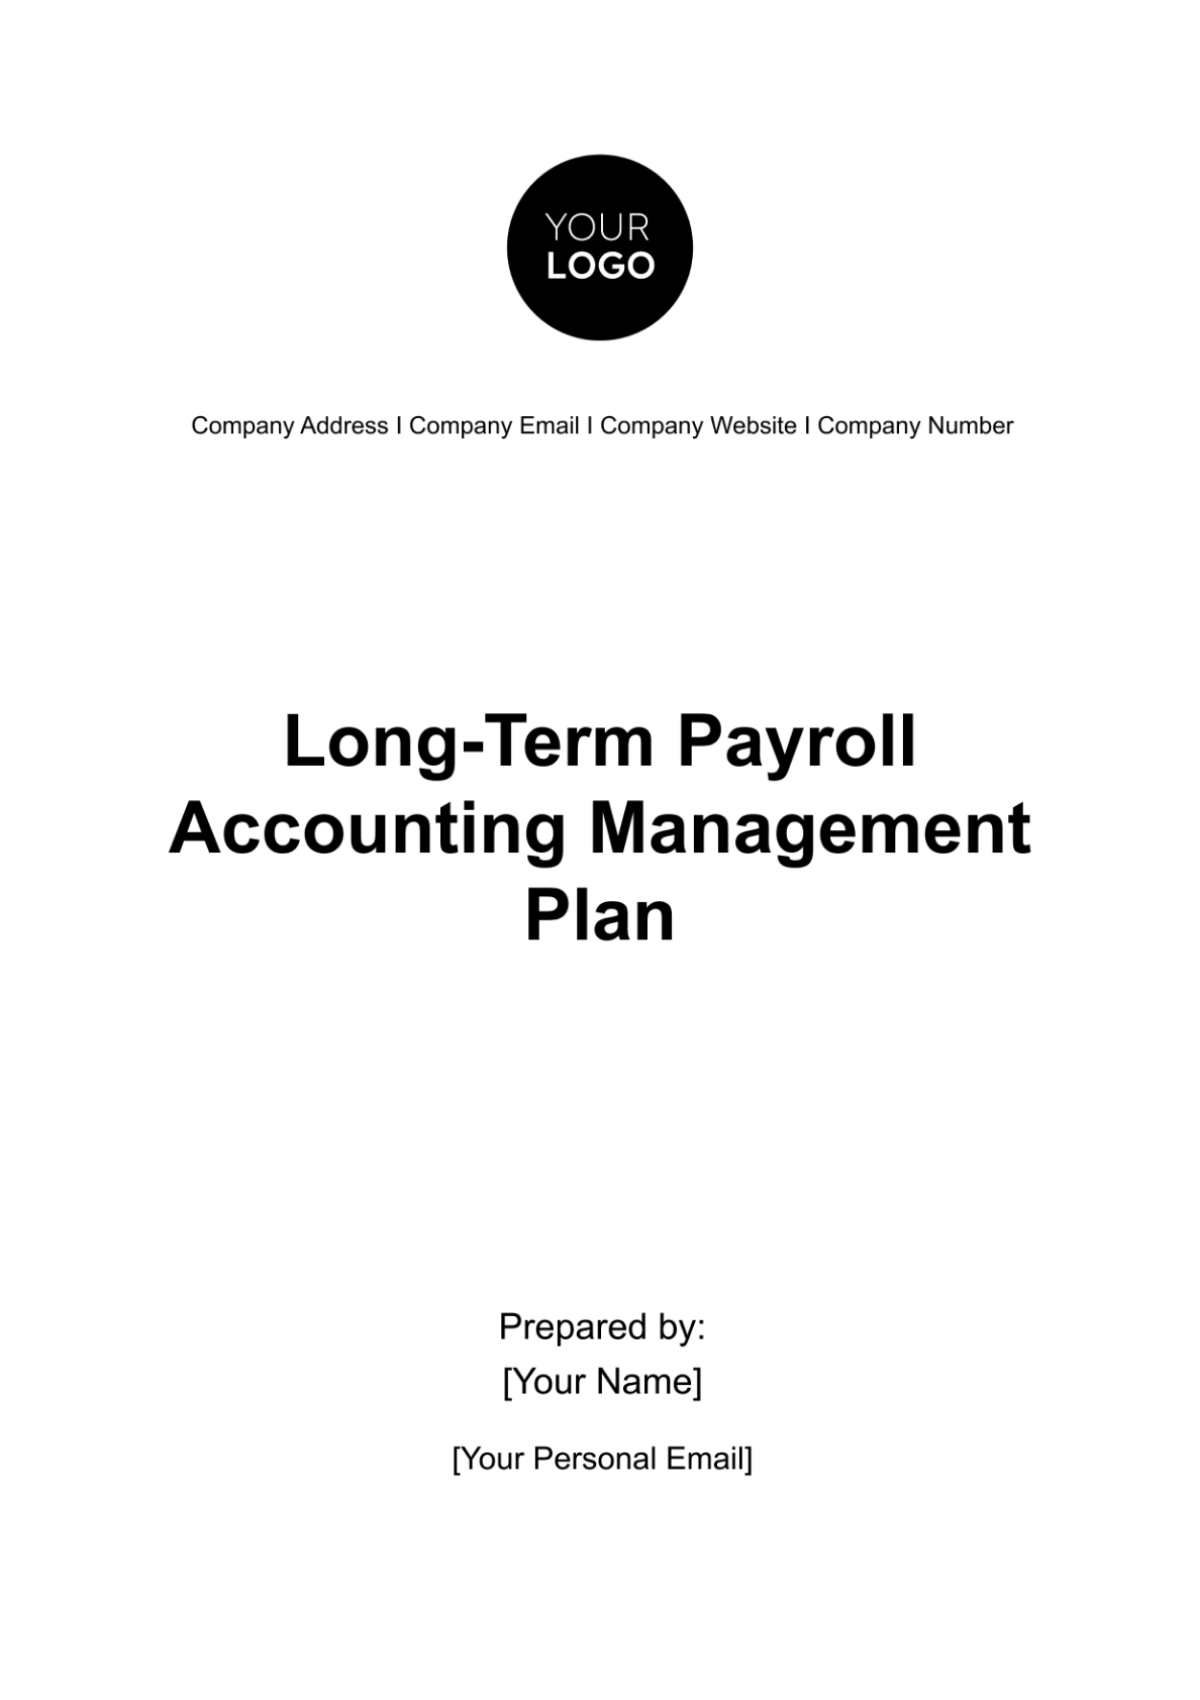 Long-Term Payroll Accounting Management Plan Template